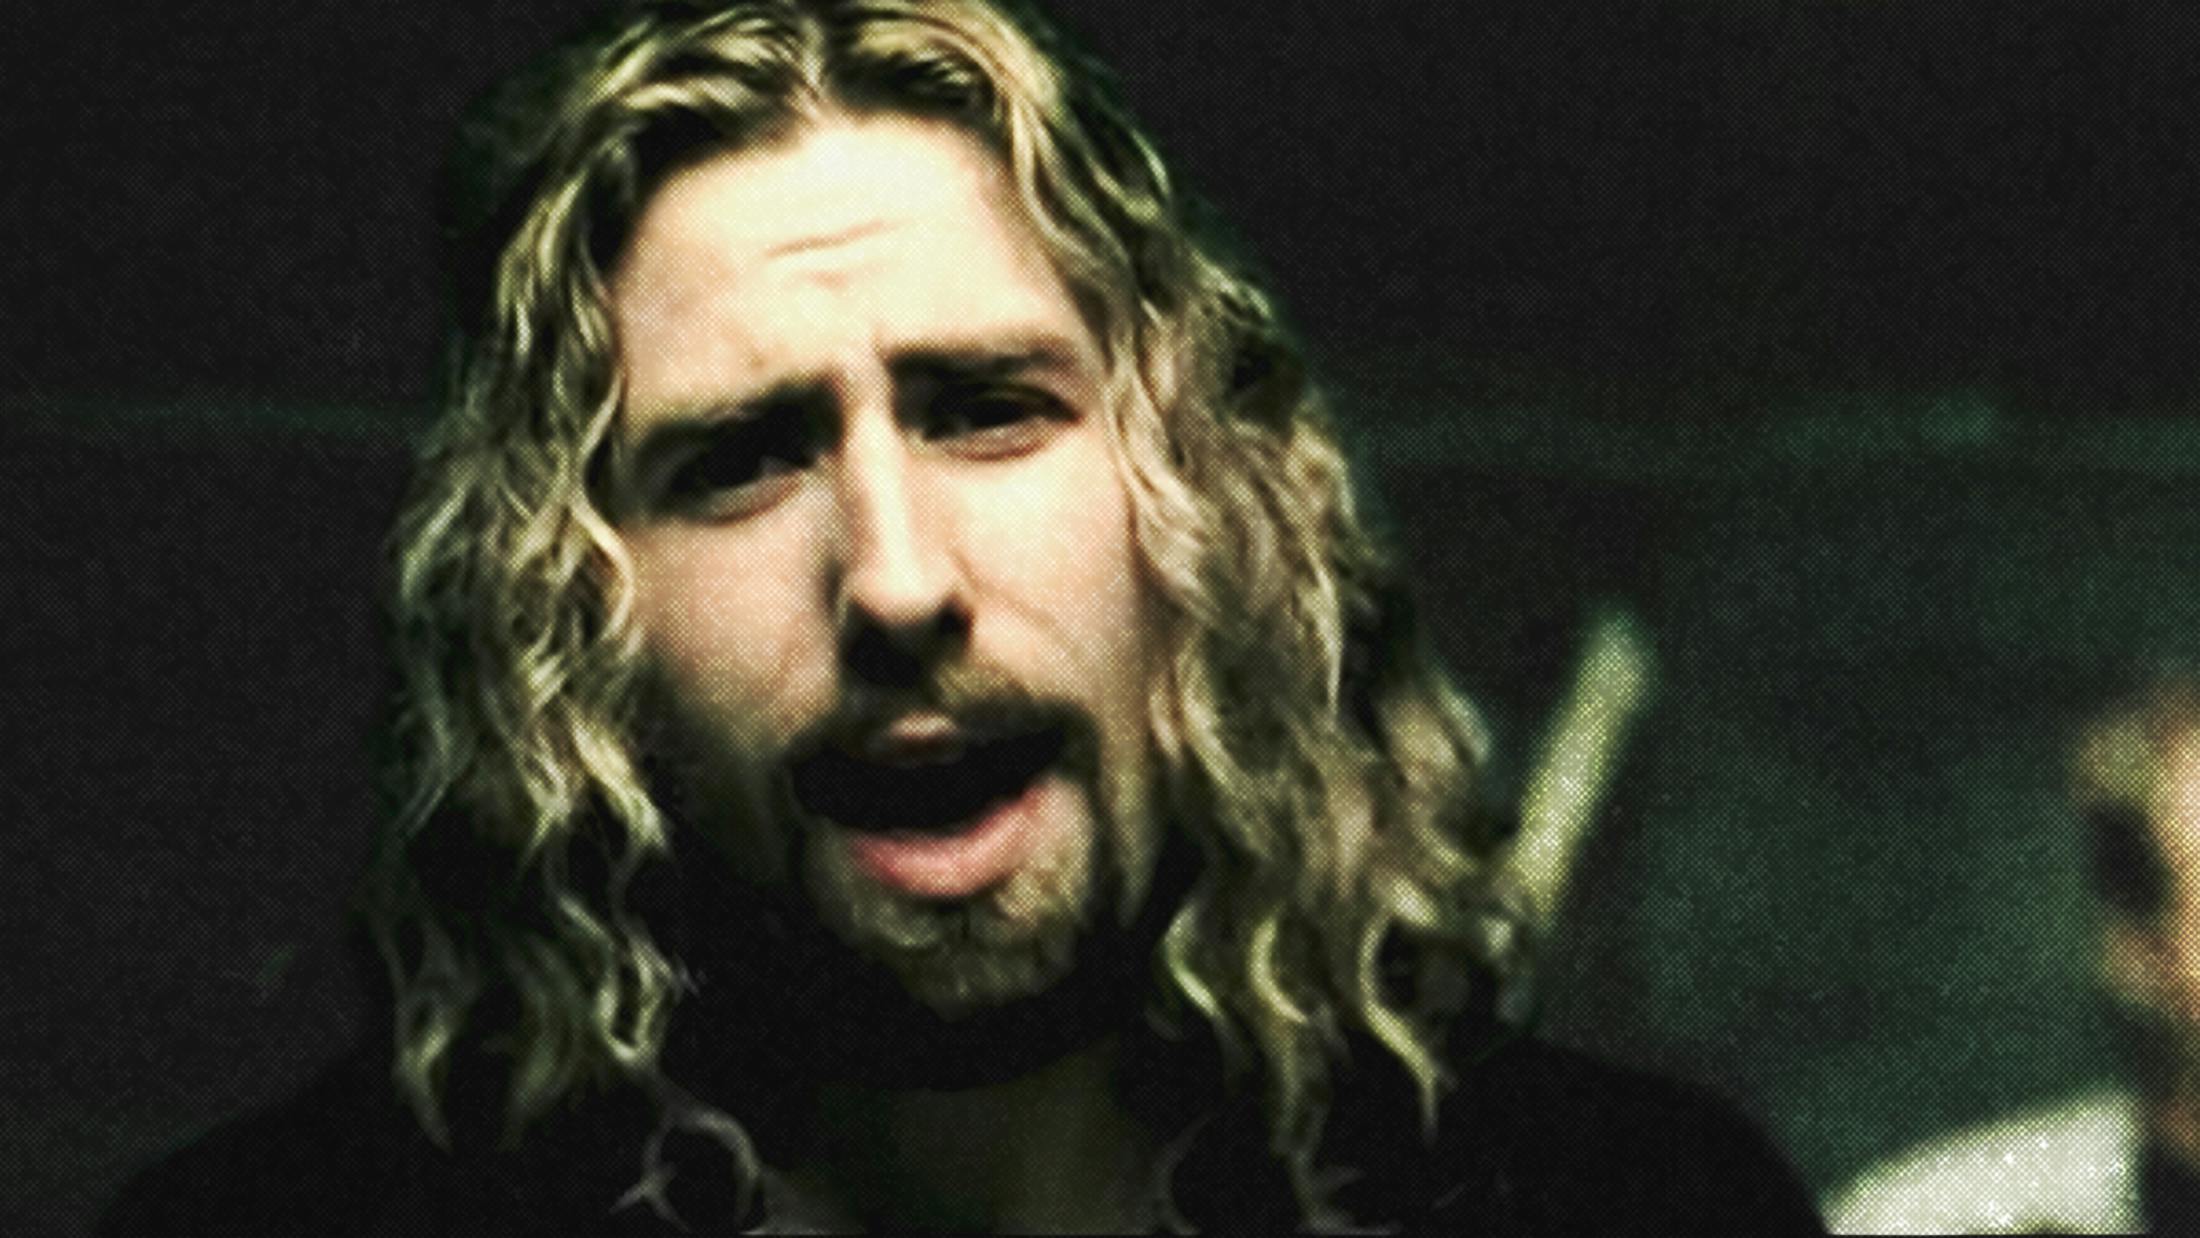 A far too forensic analysis of the video for Nickelback's How You Remind Me